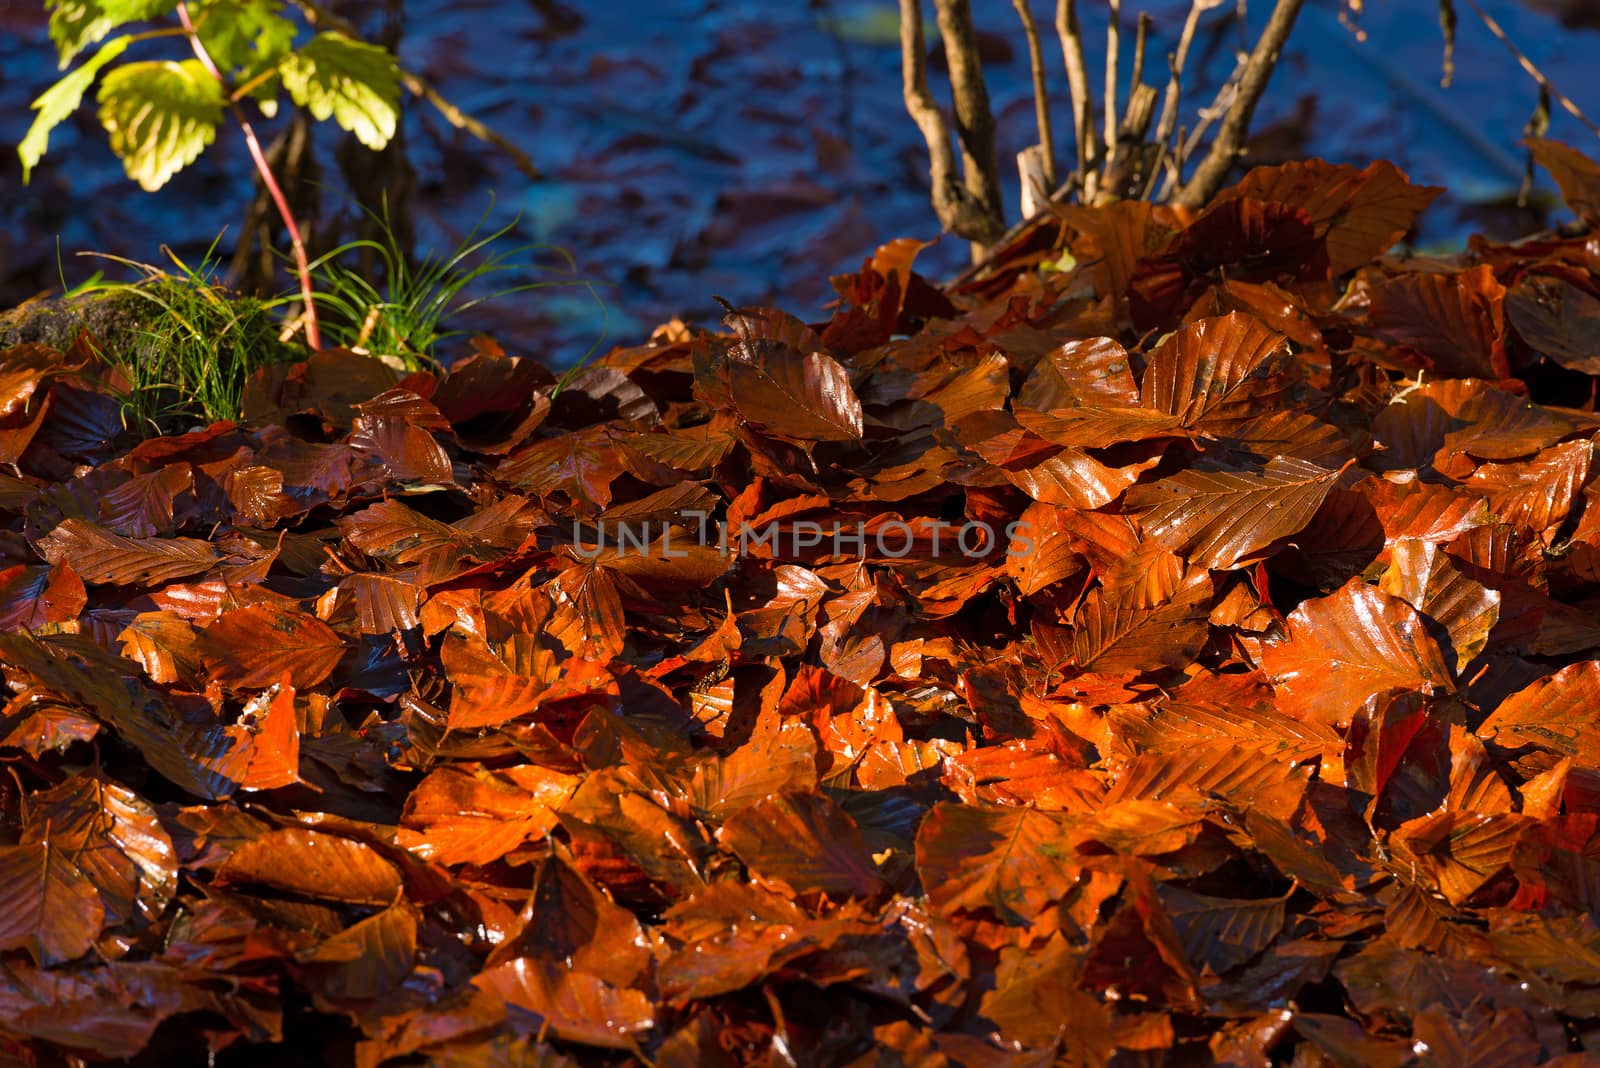 Wet leaves, brown, orange and red, in autumn on the ground in the undergrowth